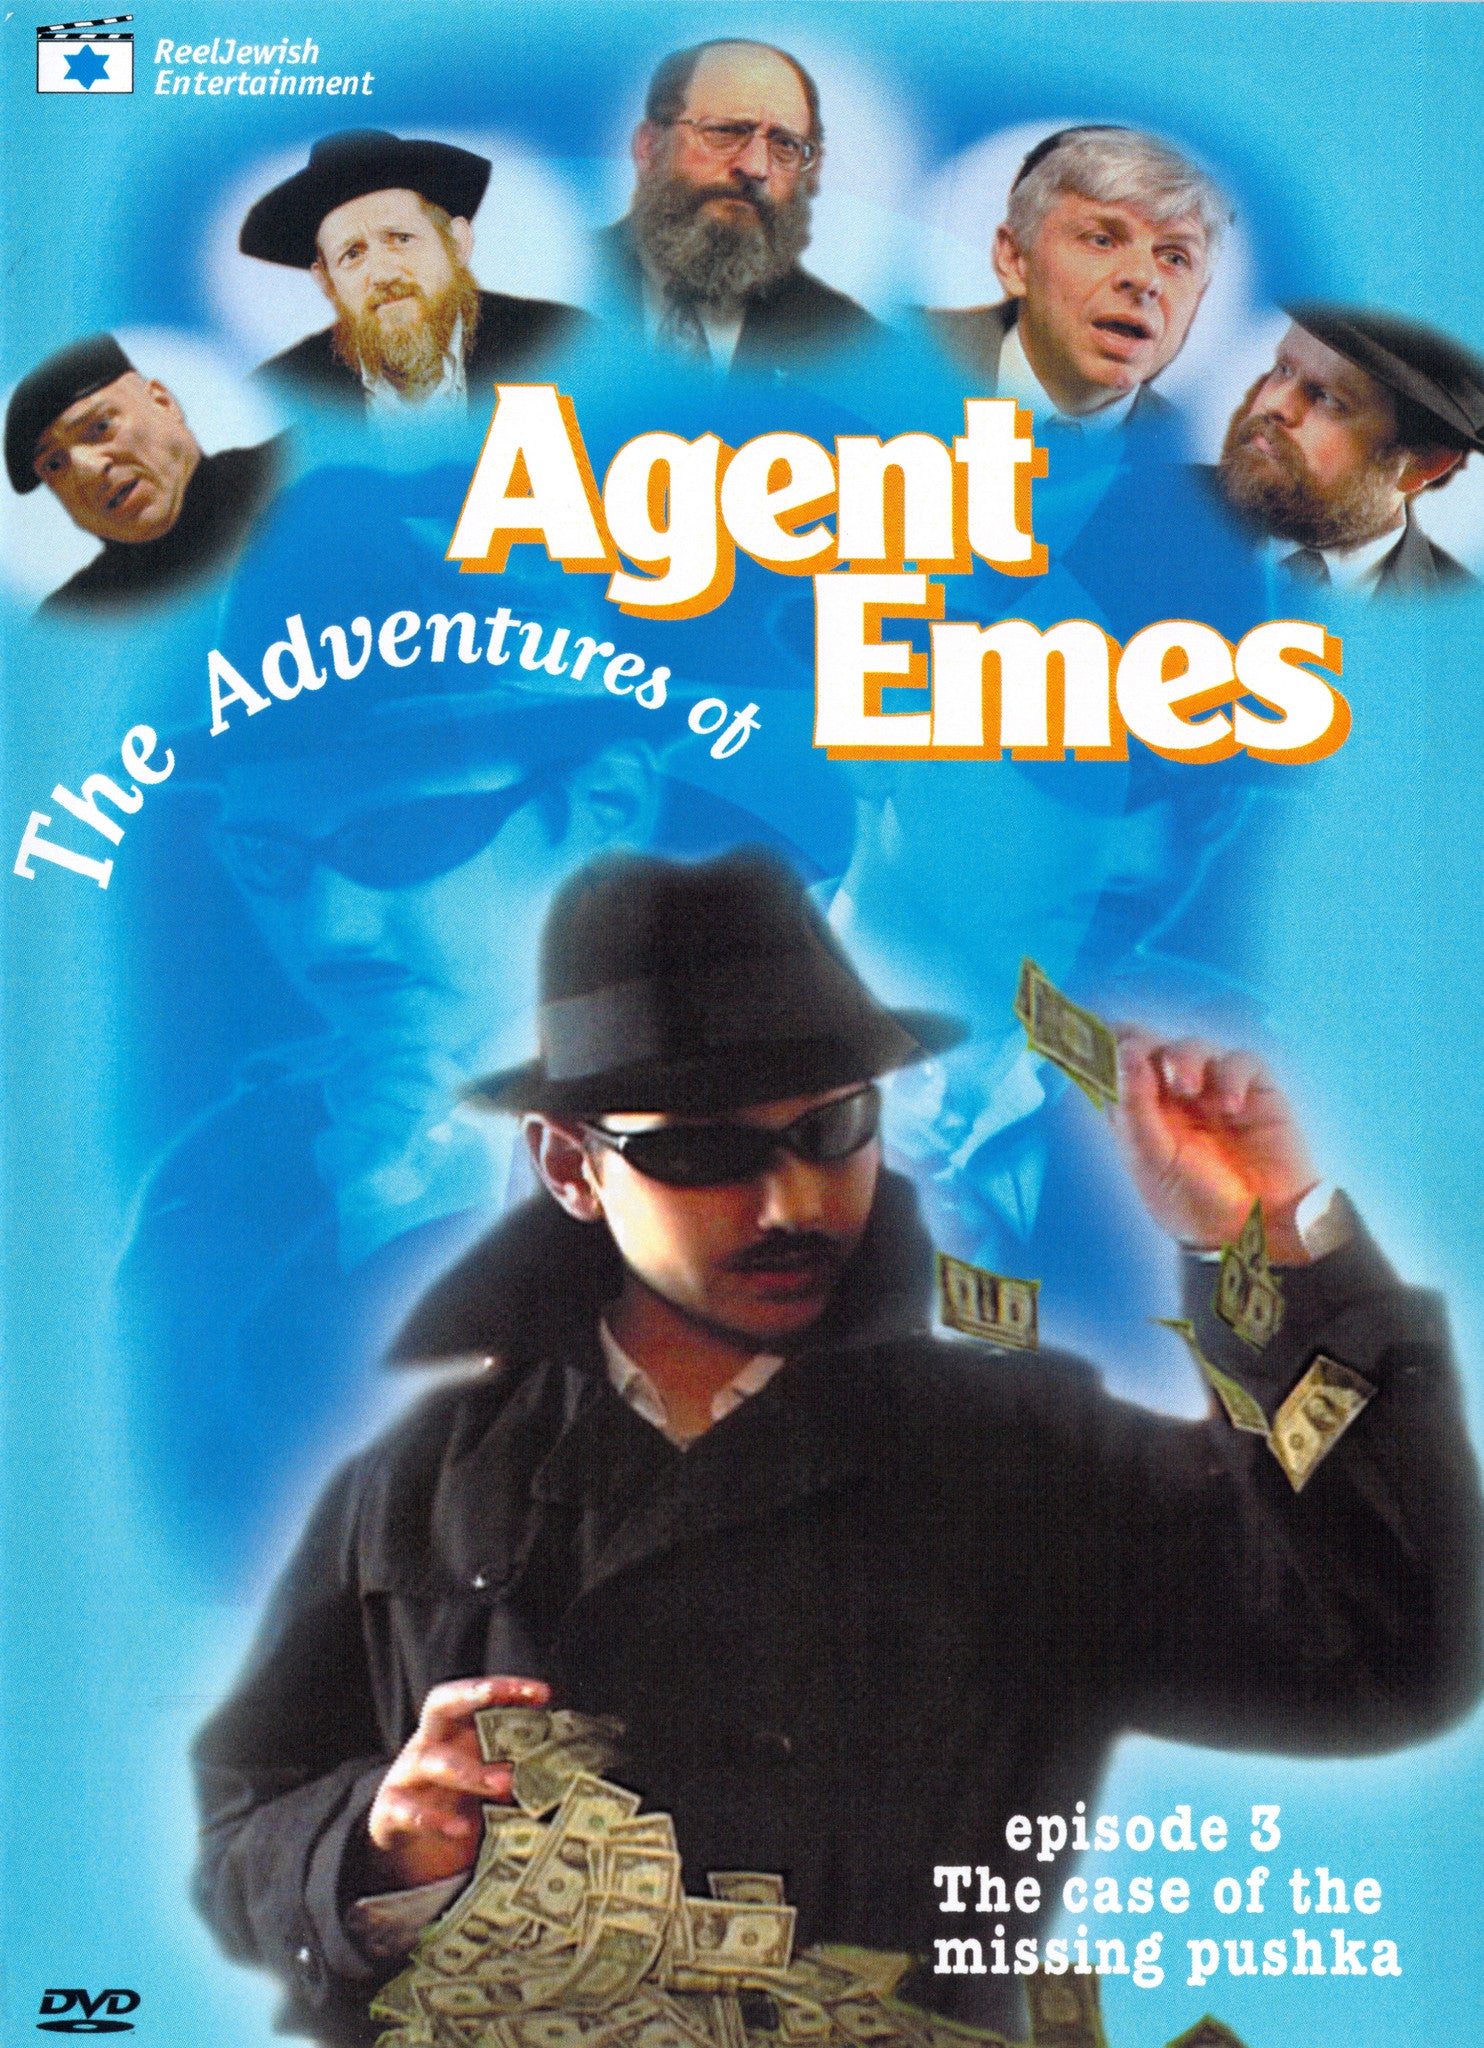 Agent Emes - Episode 3 The Case of the Missing Pushkah